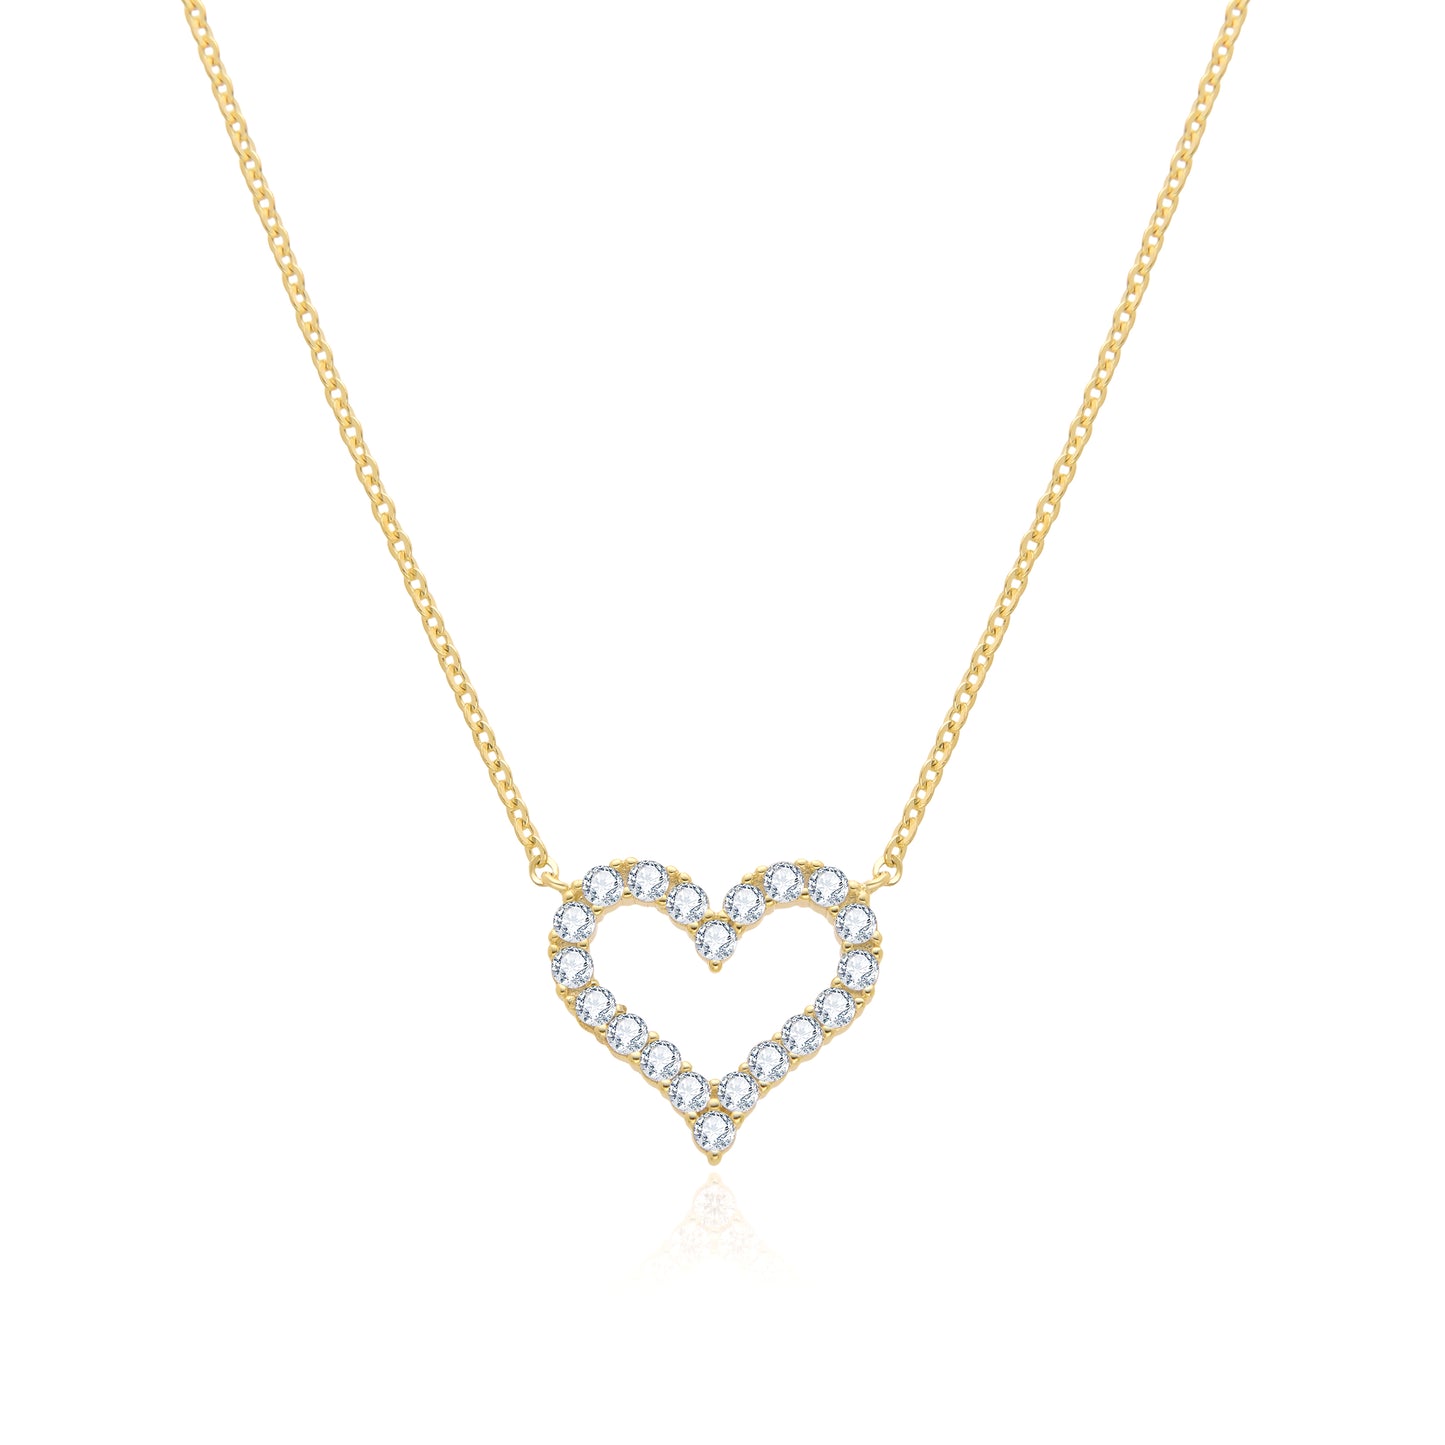 LOVE NECKLACE | GOLD